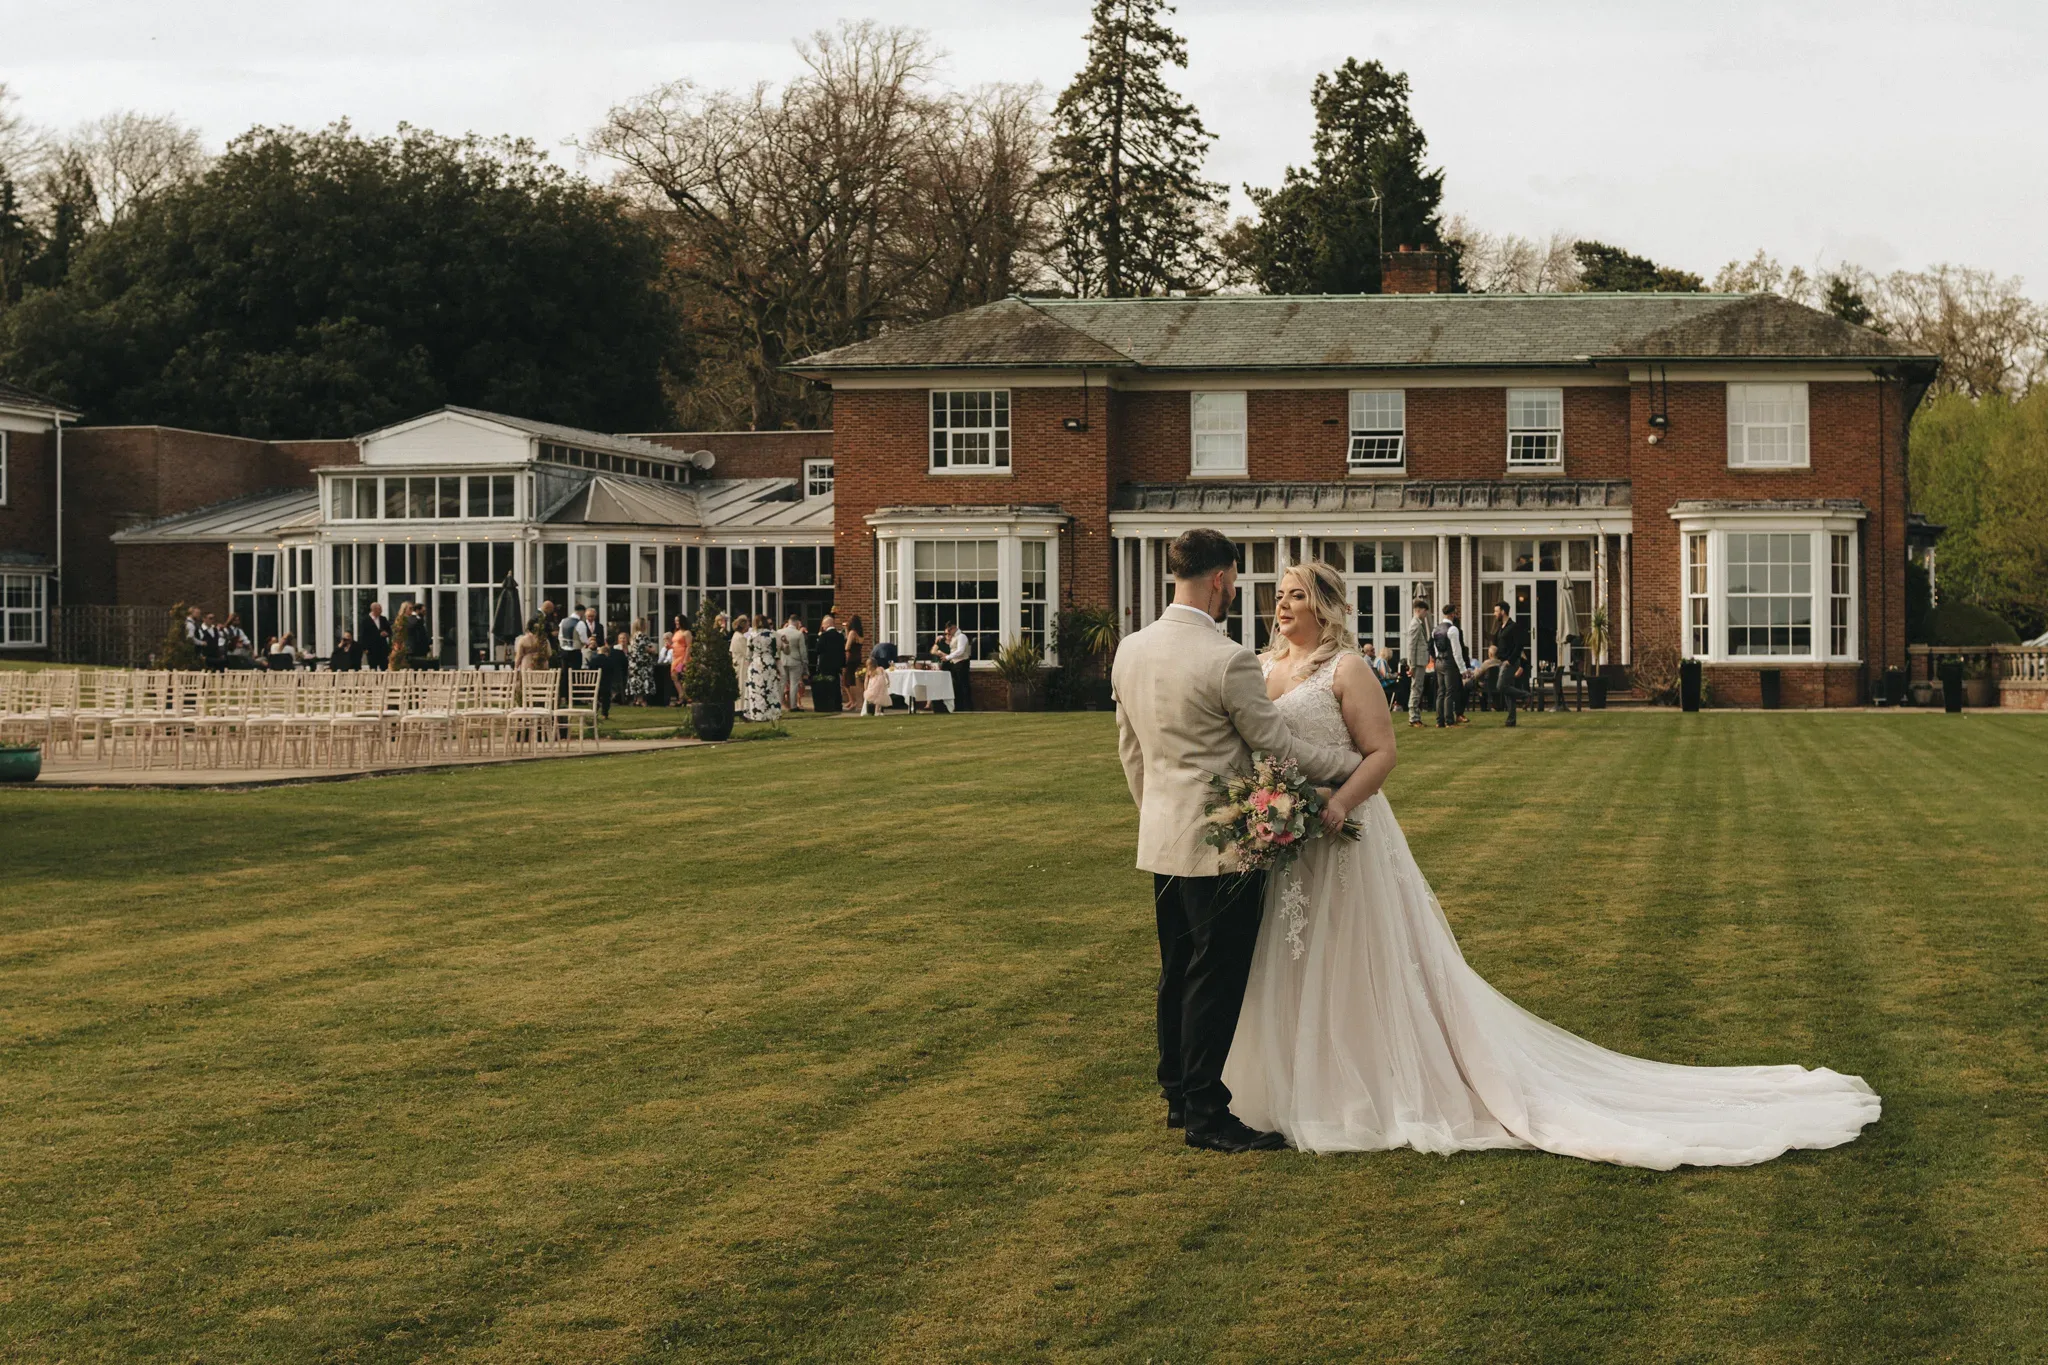 A bride in a white dress and a groom in a beige suit stand on a lush green lawn at Kenwick Park, Louth, holding hands and facing each other with a wedding party and a stately house in the background.